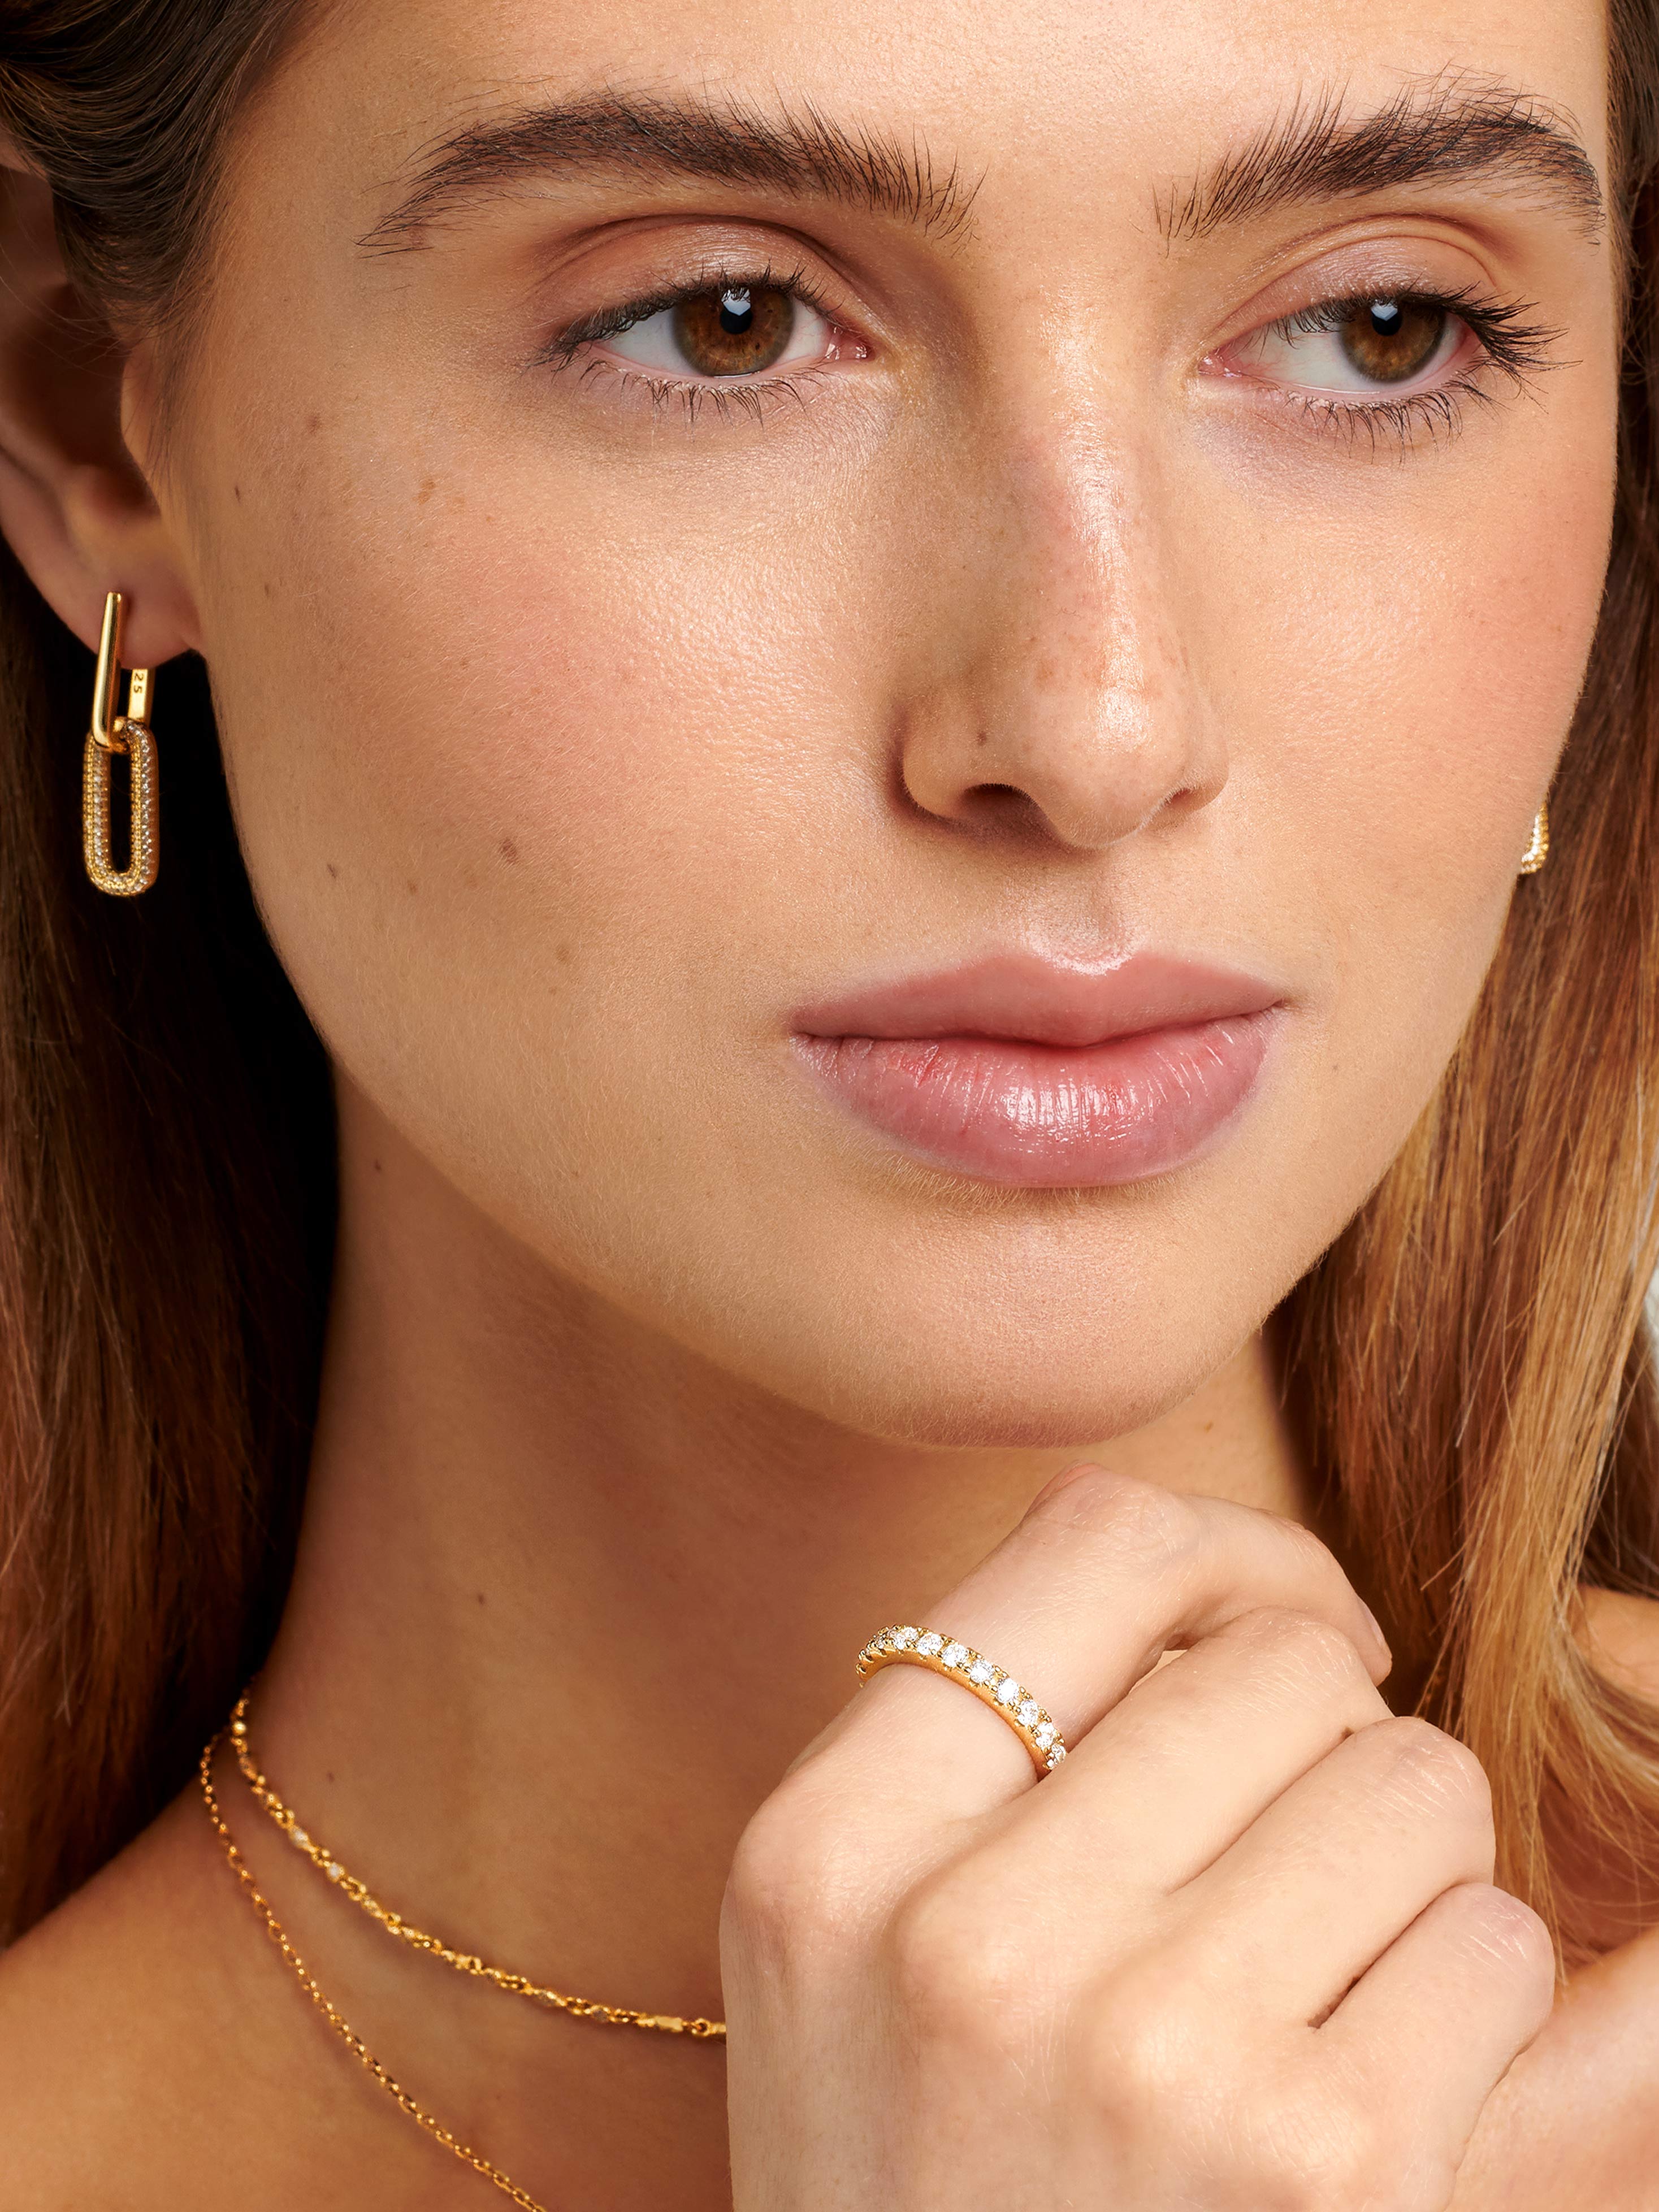 Female model wearing gold Eternity Ring With Sparkly Stones styled together with chain hoop earrings.